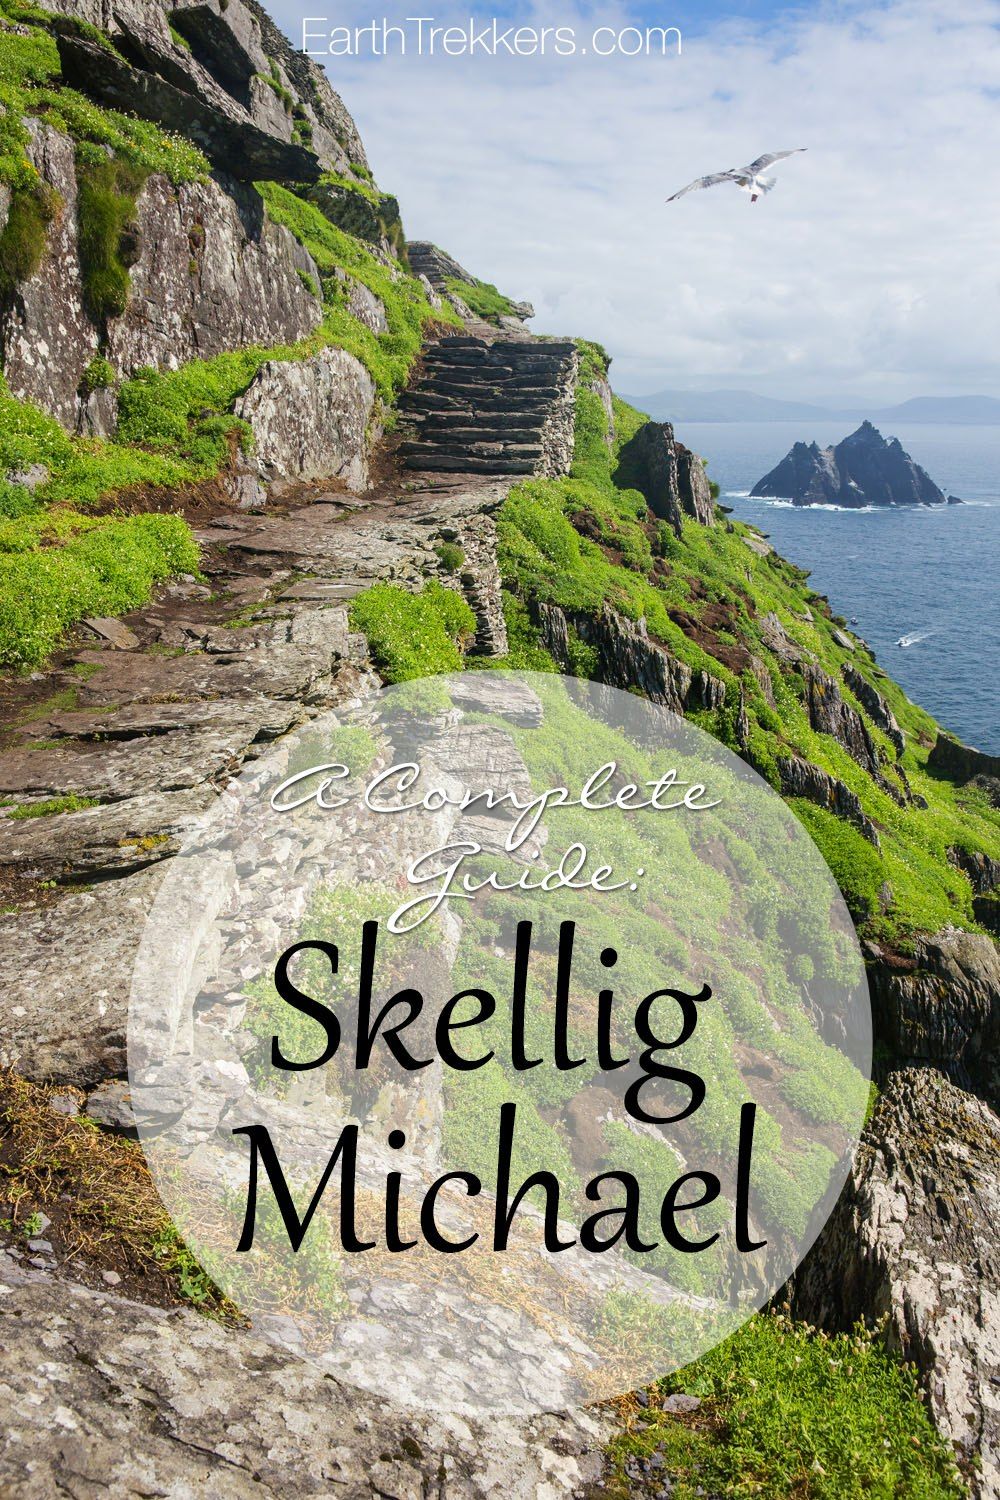 How to Visit Skellig Michael Ireland Star Wars Filming Location